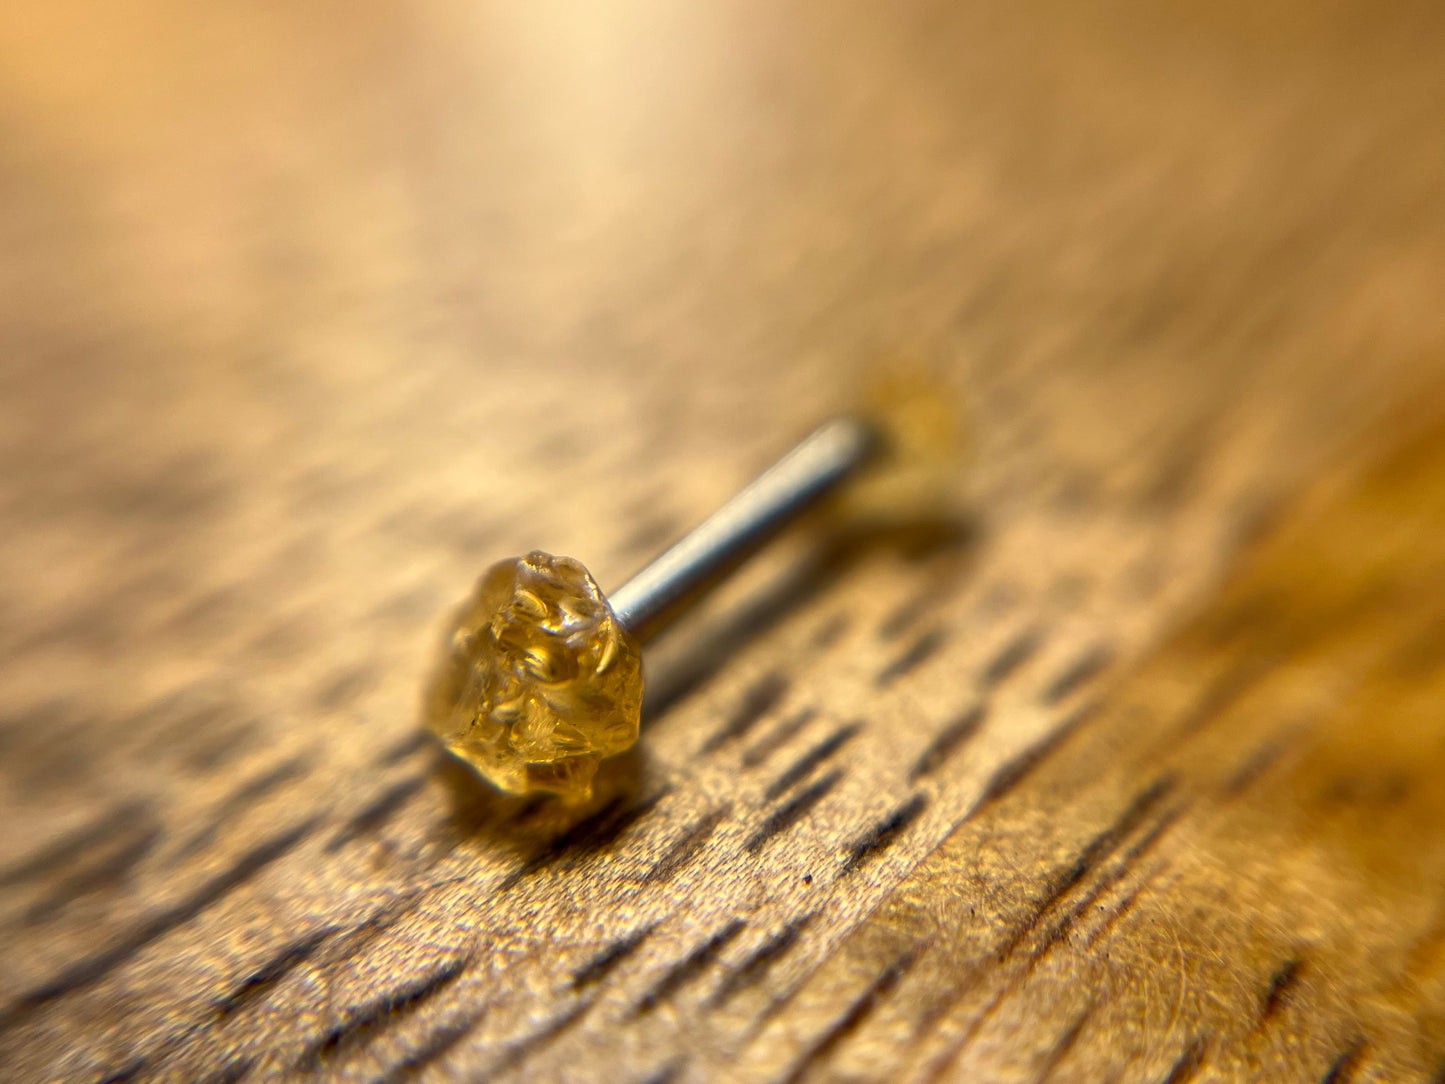 Citrine Barbell 1.2mm, 16g Citrine Bar Bell, 8mm-10mm Internally Threaded Surgical Steel Straight Or Curved Bar, 3mm Raw Natural Crystal